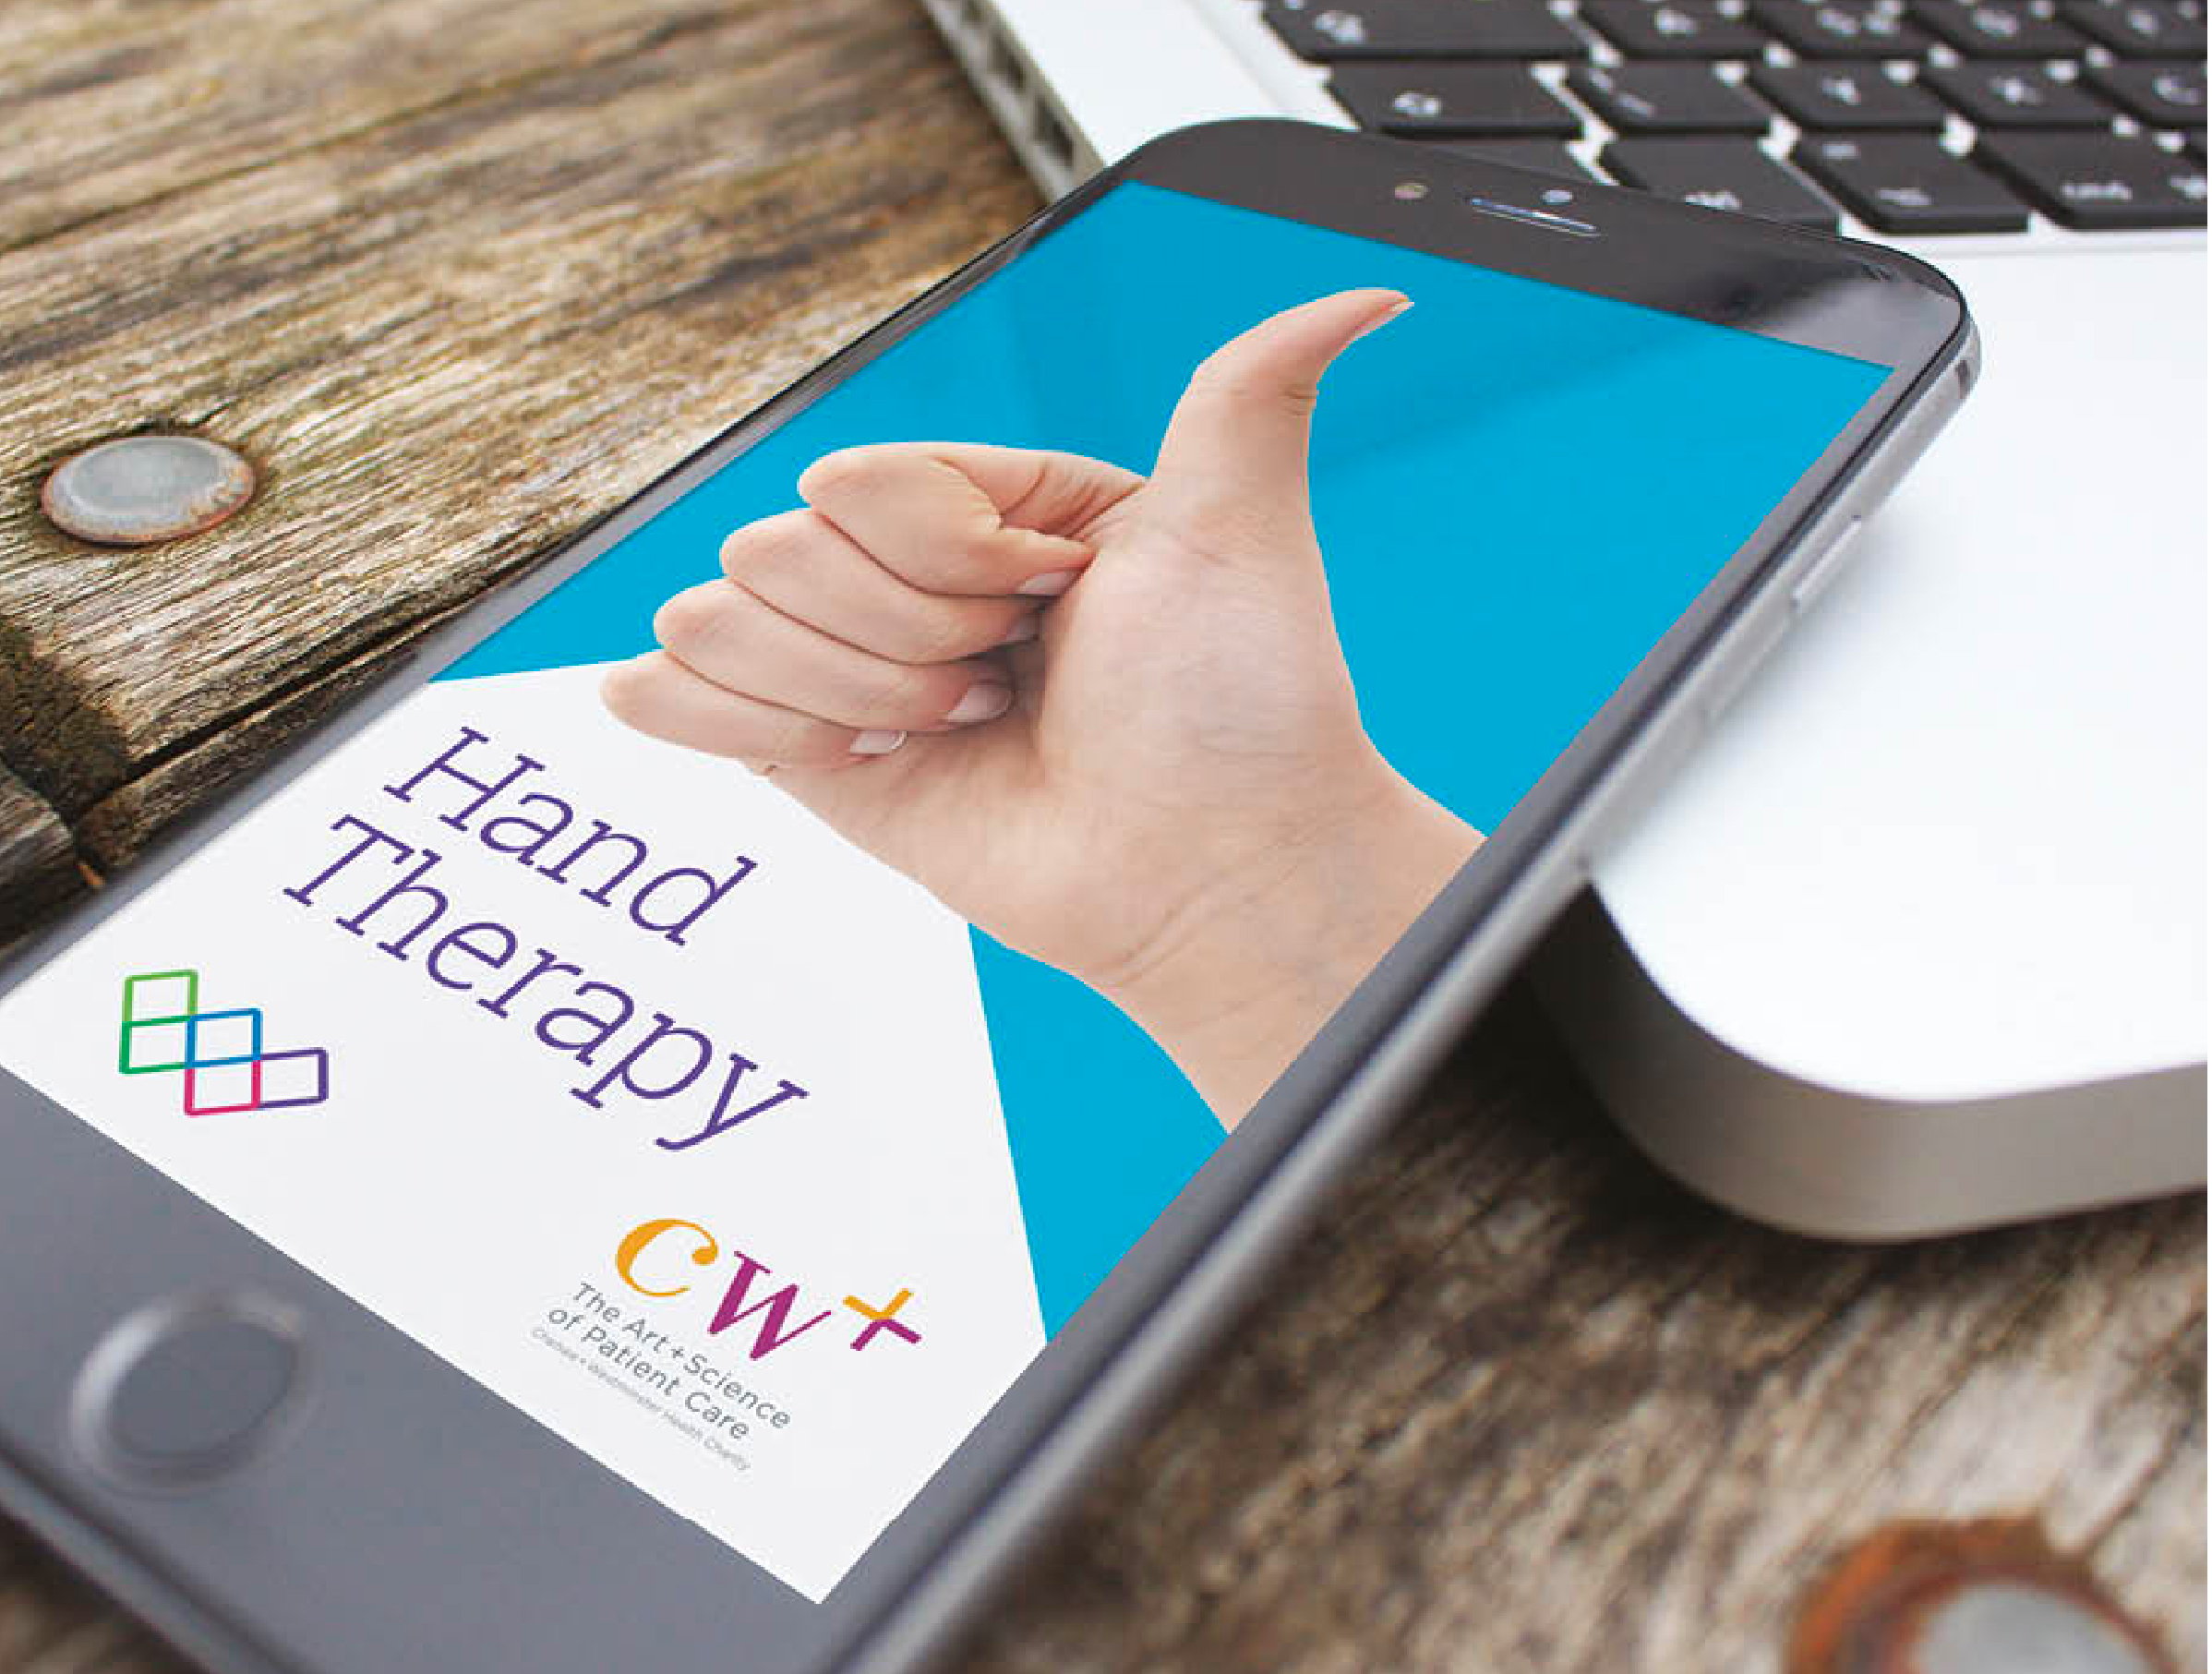 CW+ hand therapy health app on mobile phone